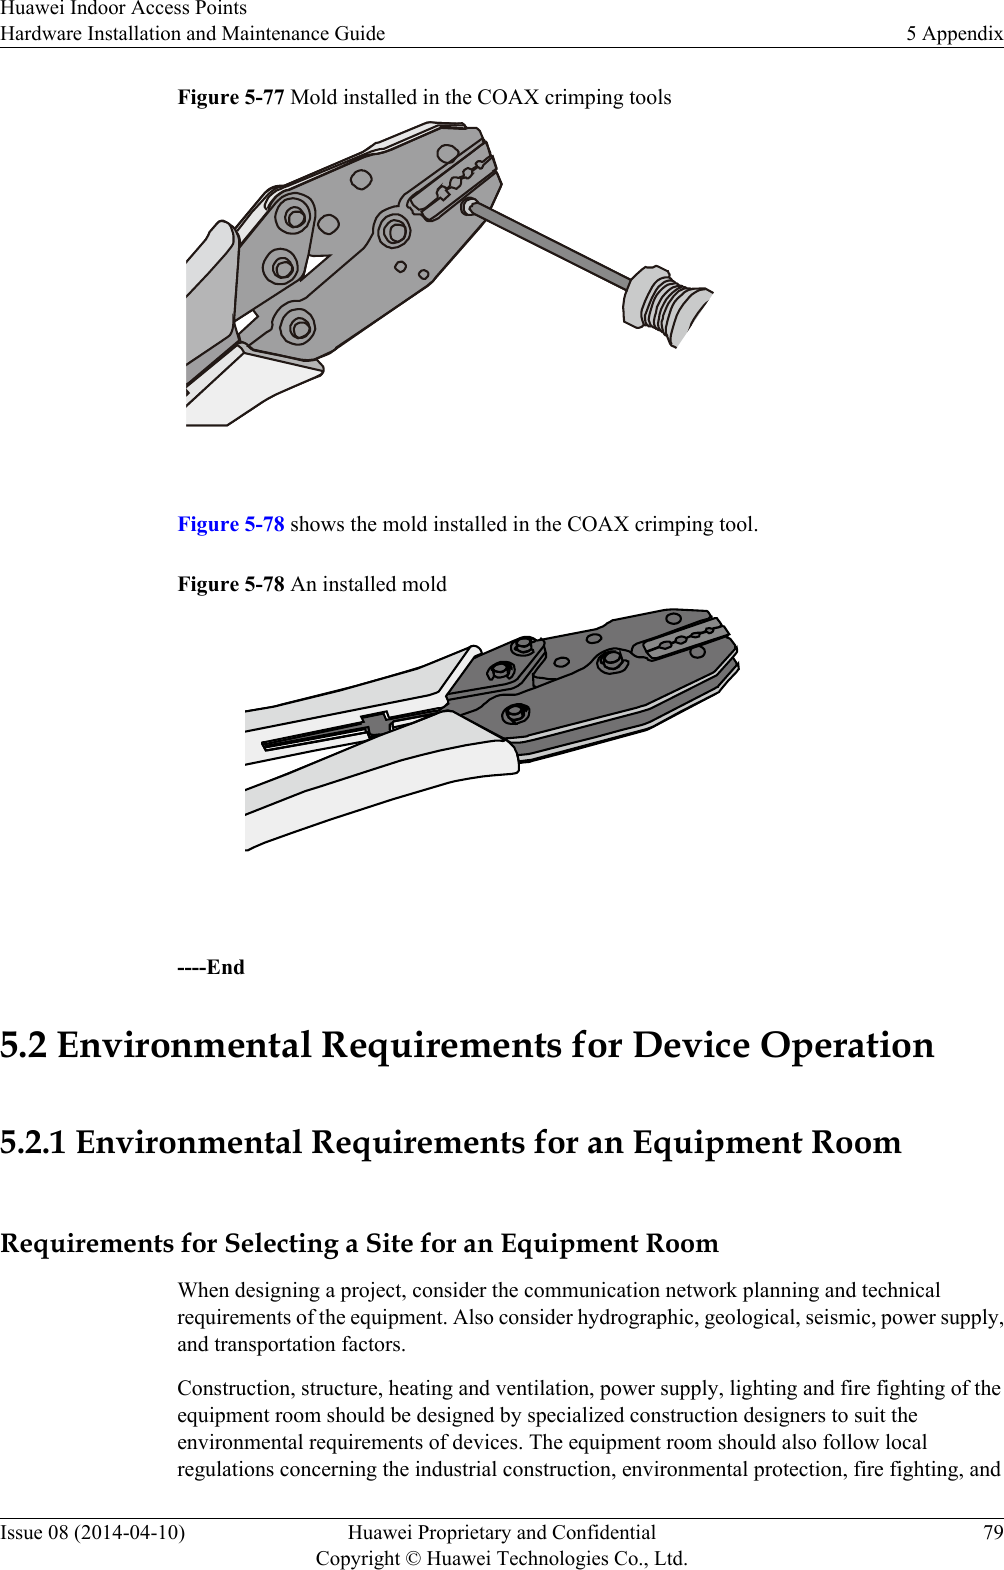 Figure 5-77 Mold installed in the COAX crimping tools Figure 5-78 shows the mold installed in the COAX crimping tool.Figure 5-78 An installed mold ----End5.2 Environmental Requirements for Device Operation5.2.1 Environmental Requirements for an Equipment RoomRequirements for Selecting a Site for an Equipment RoomWhen designing a project, consider the communication network planning and technicalrequirements of the equipment. Also consider hydrographic, geological, seismic, power supply,and transportation factors.Construction, structure, heating and ventilation, power supply, lighting and fire fighting of theequipment room should be designed by specialized construction designers to suit theenvironmental requirements of devices. The equipment room should also follow localregulations concerning the industrial construction, environmental protection, fire fighting, andHuawei Indoor Access PointsHardware Installation and Maintenance Guide 5 AppendixIssue 08 (2014-04-10) Huawei Proprietary and ConfidentialCopyright © Huawei Technologies Co., Ltd.79